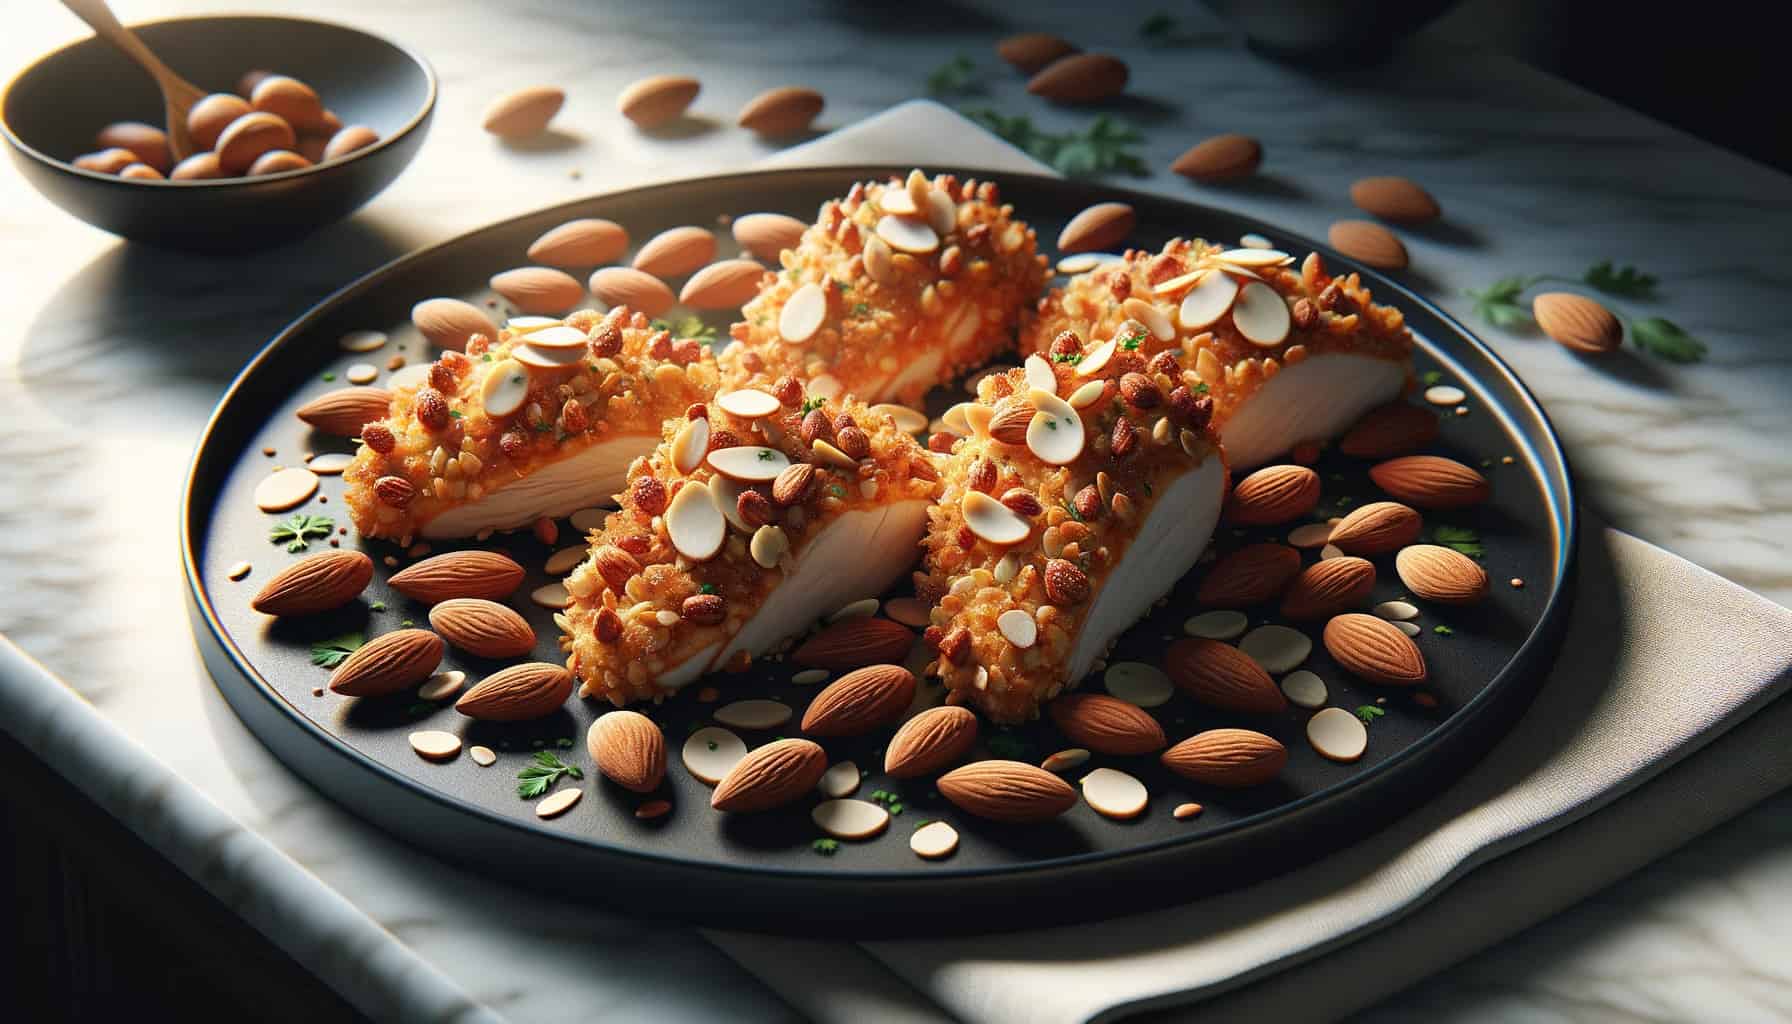 Almond-encrusted chicken pieces arranged on a sleek black plate. The almonds make the chicken crunchy, and the plate is garnished with fresh herbs.